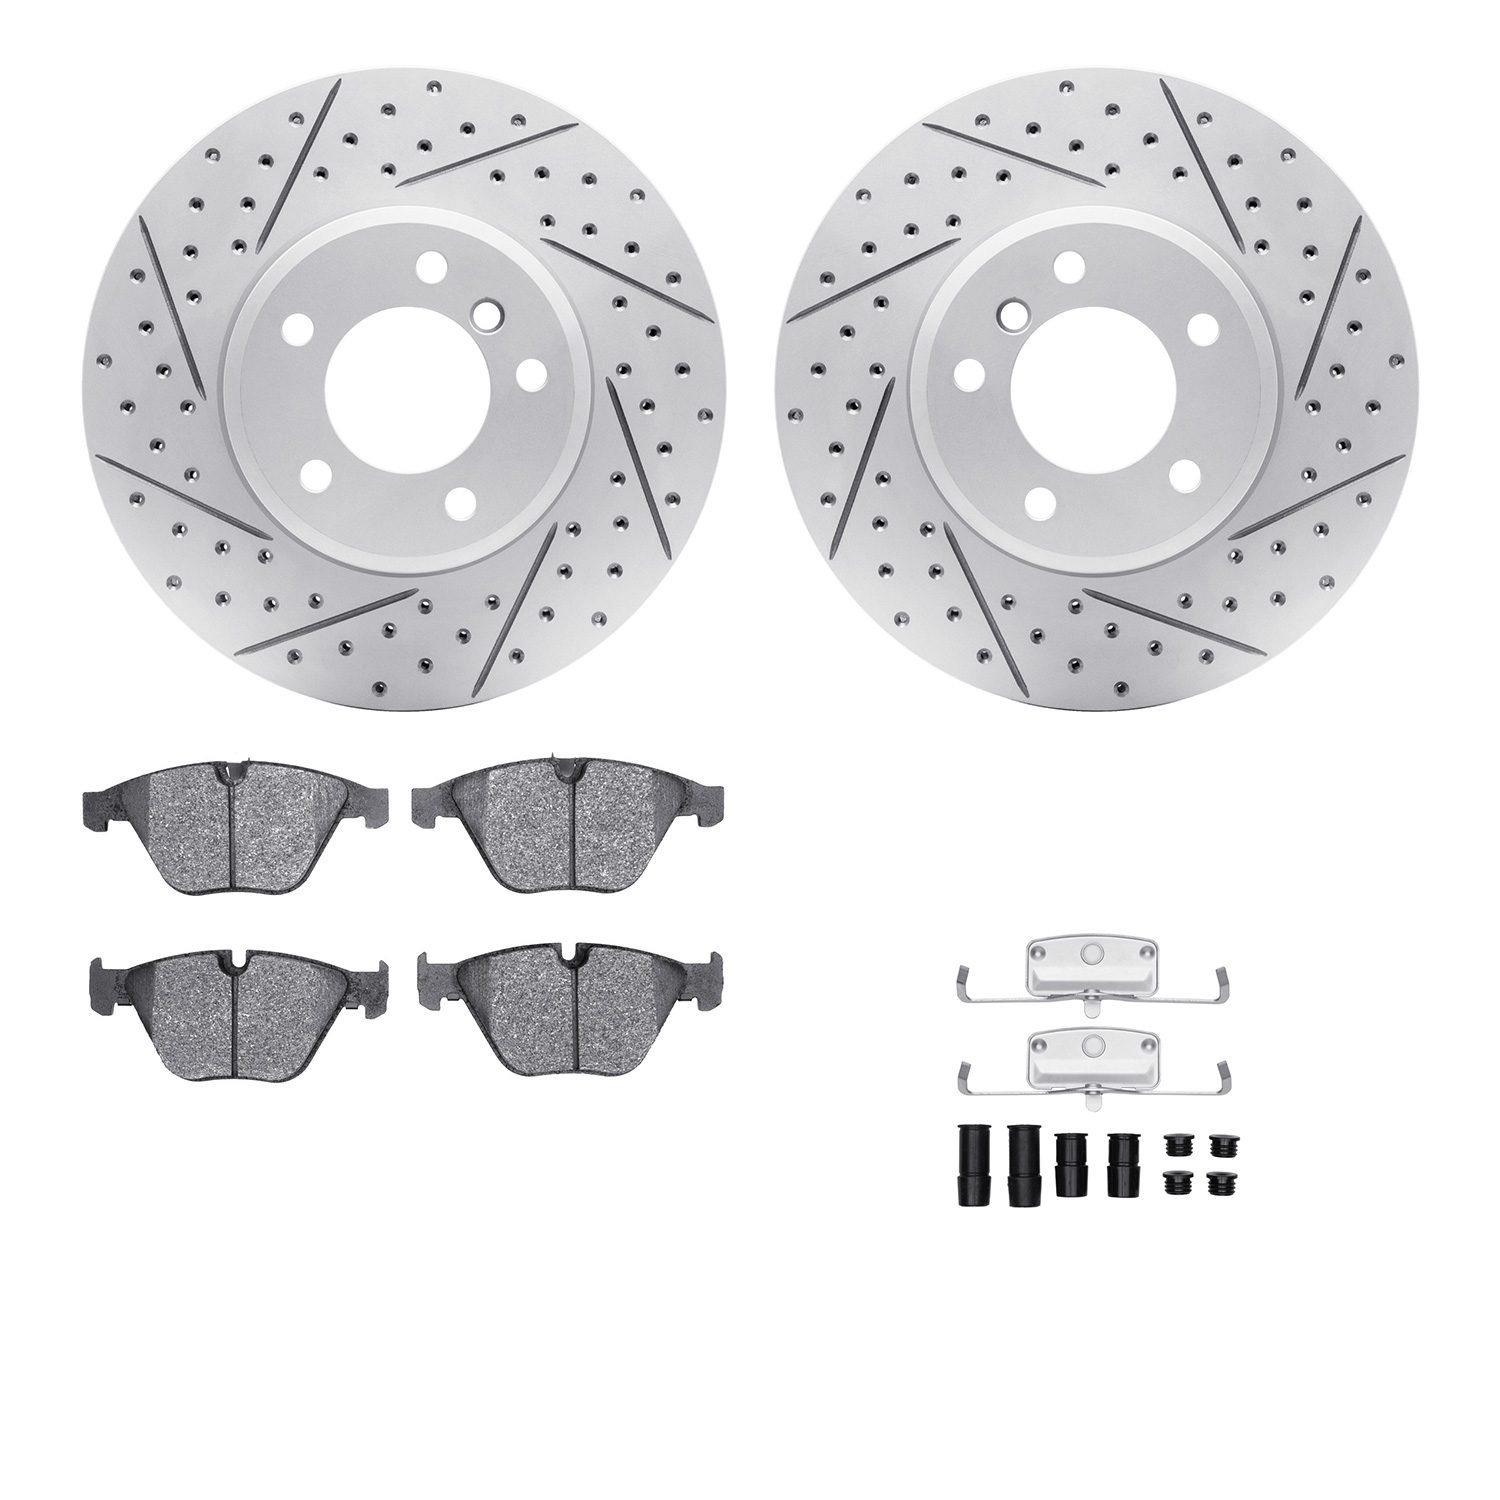 2512-31037 Geoperformance Drilled/Slotted Rotors w/5000 Advanced Brake Pads Kit & Hardware, 2008-2010 BMW, Position: Front